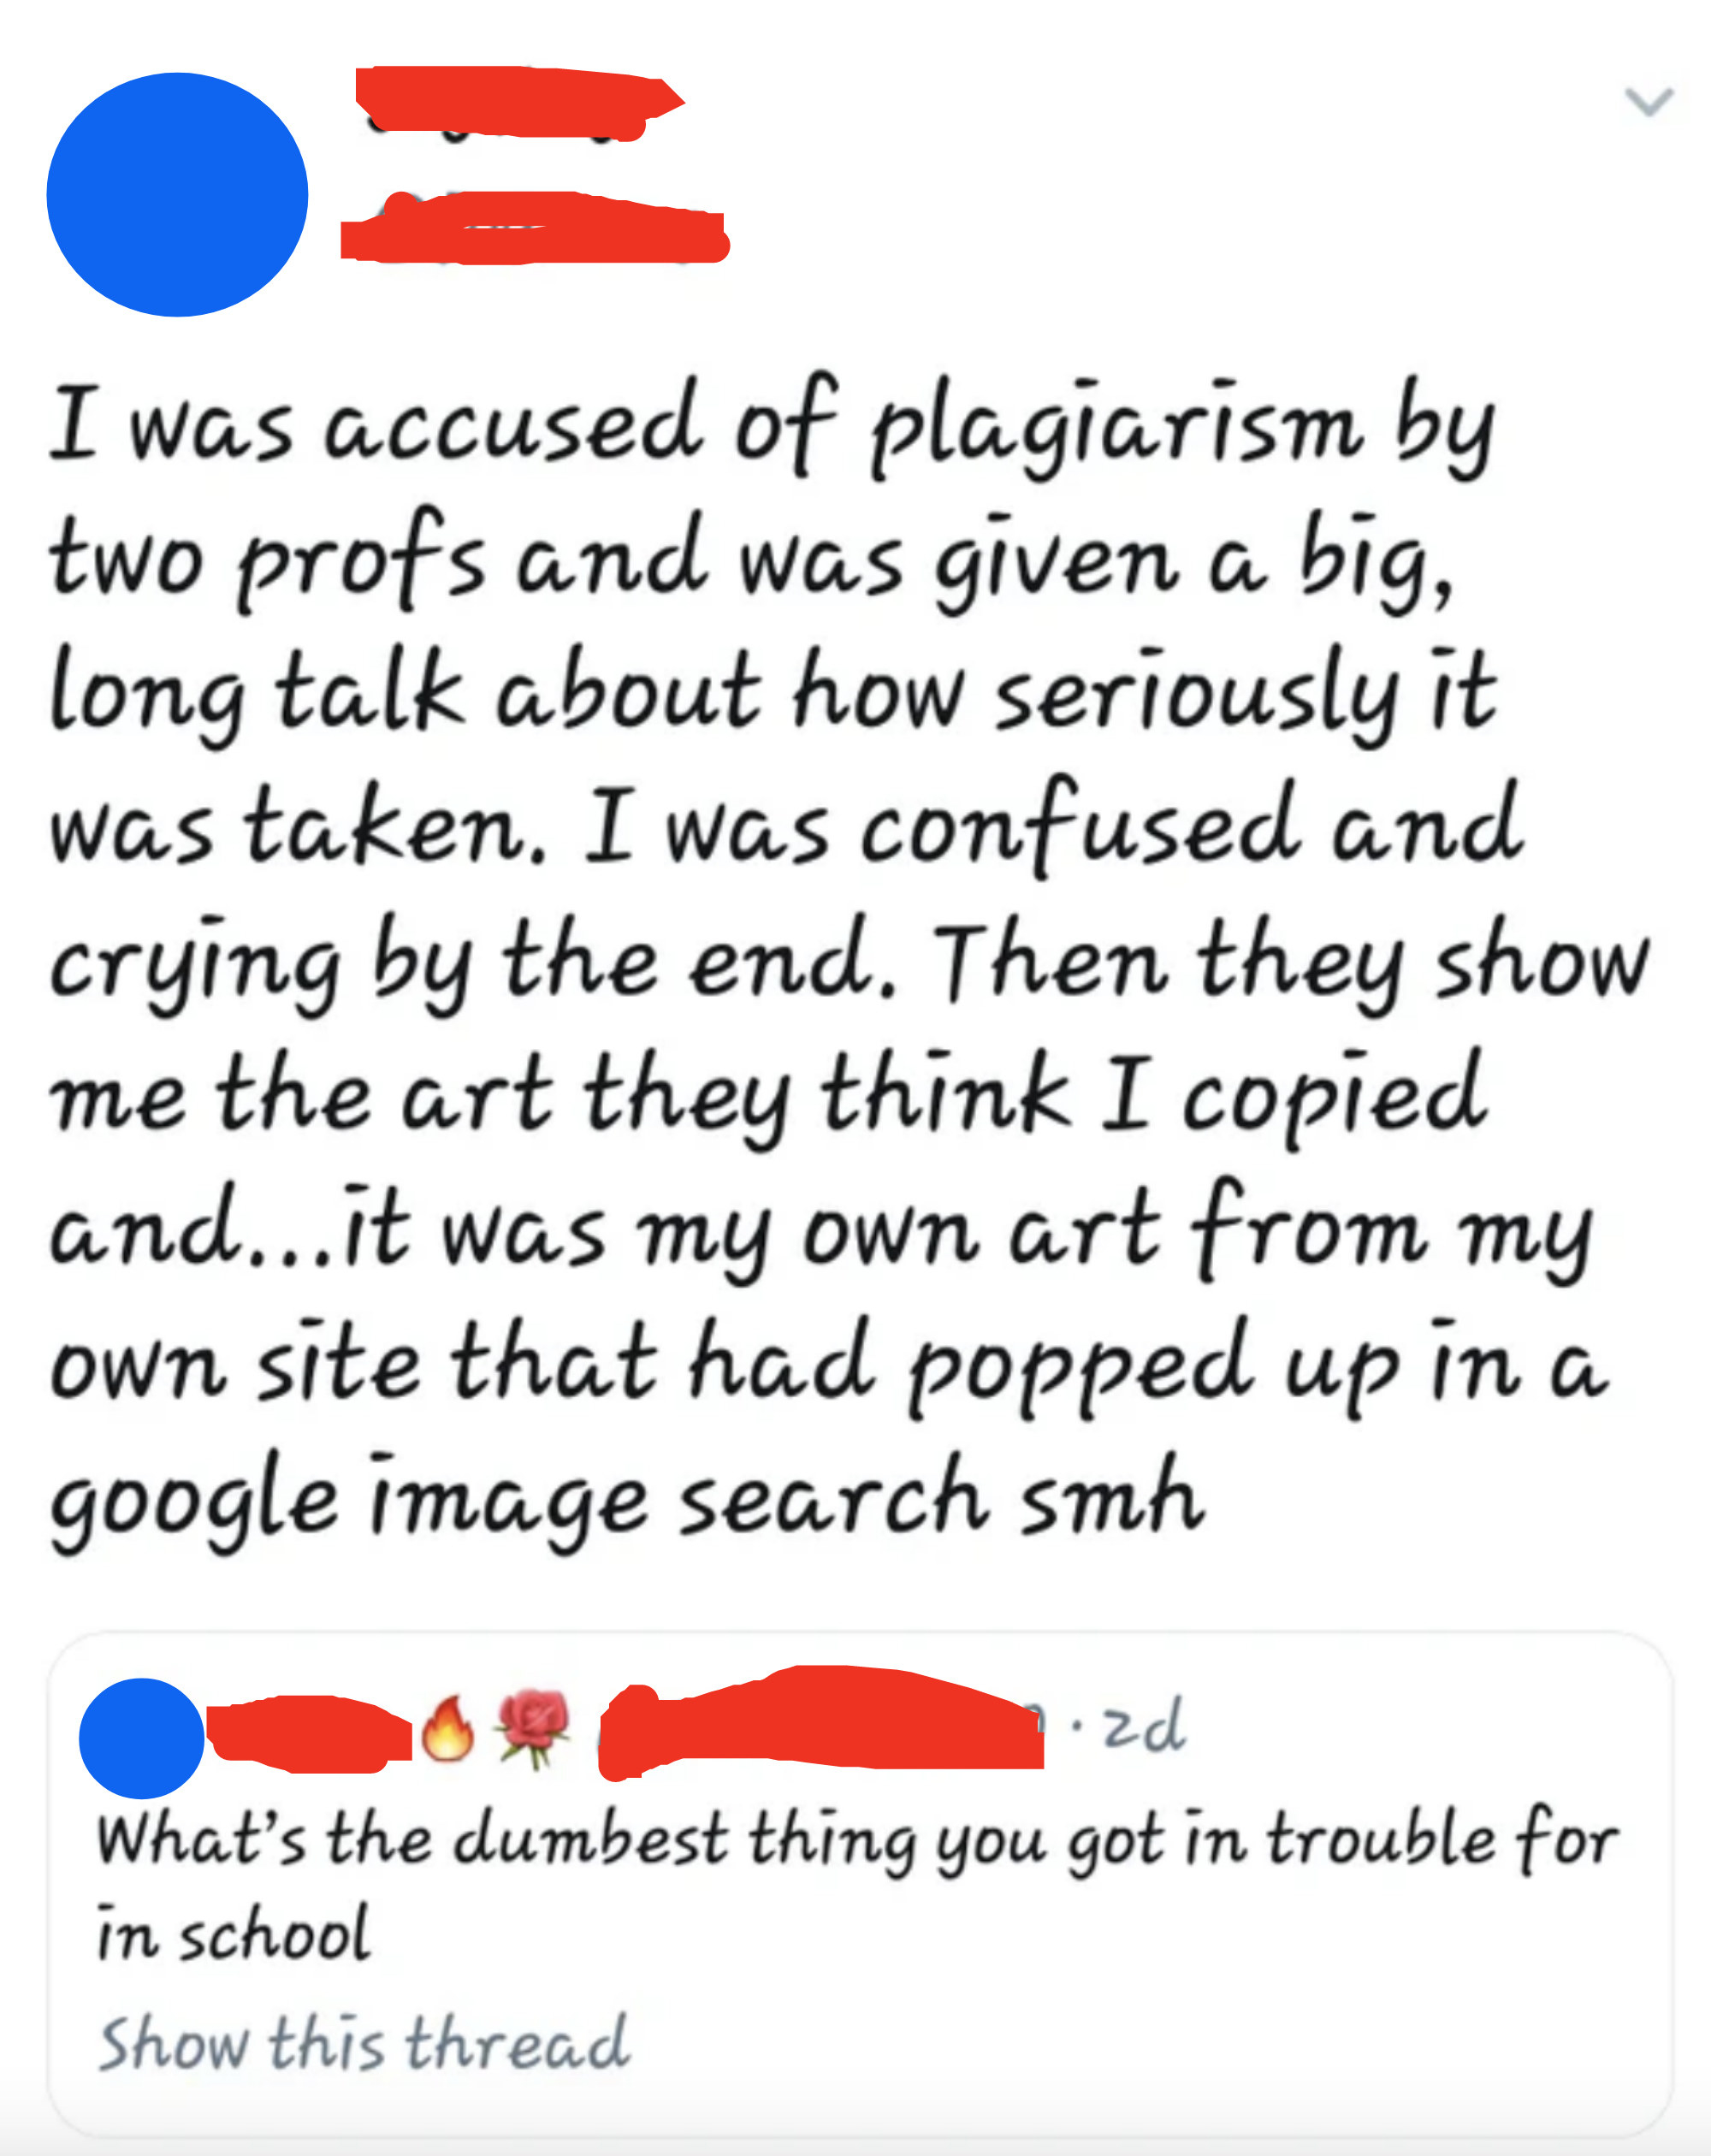 Student tweeting they were accused of plagiarism for their own work